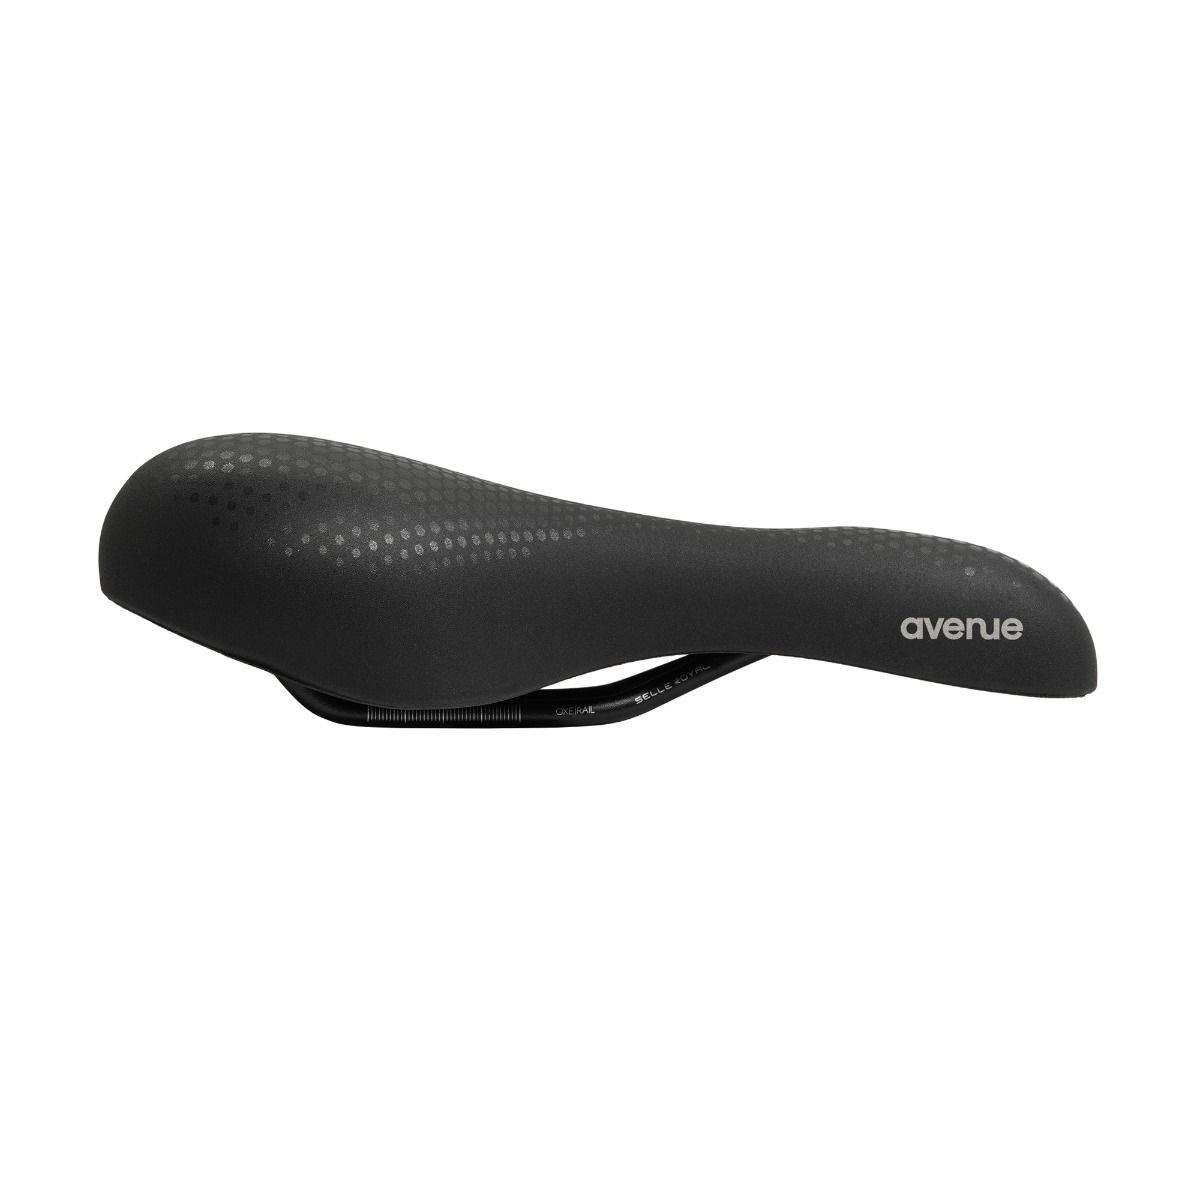 | BackCountry Royal Athletic Saddle in The Avenue Selle - The Truckee BackCountry Black